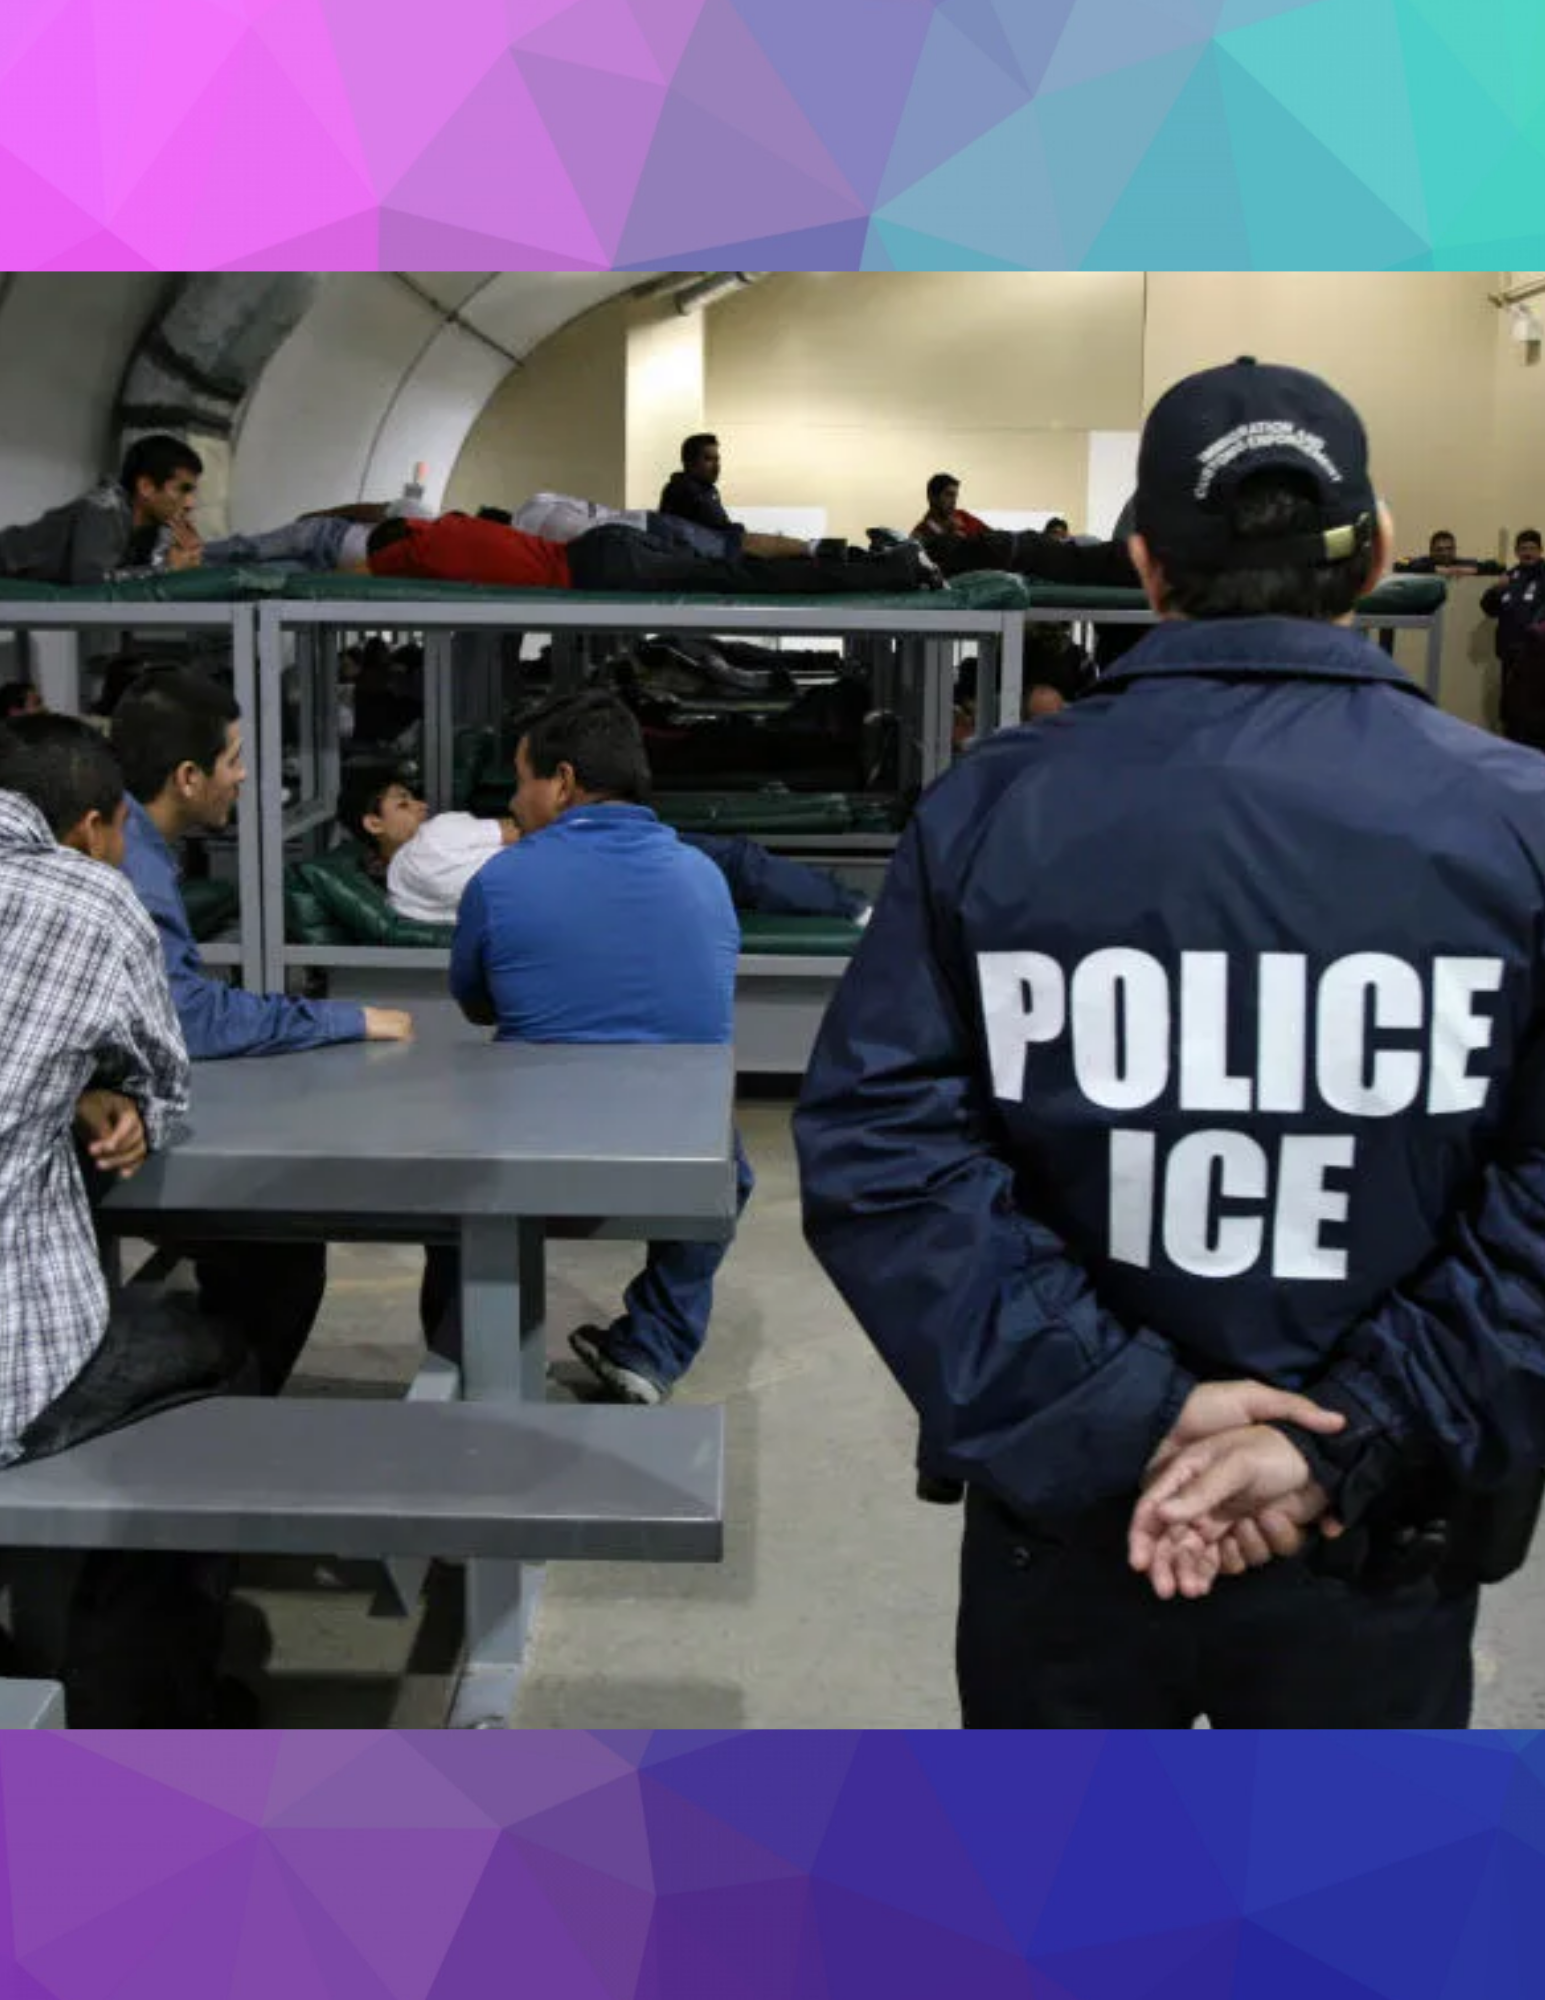 Lawyers and Scholars to LexisNexis, Thomson Reuters: Stop Helping ICE Deport People